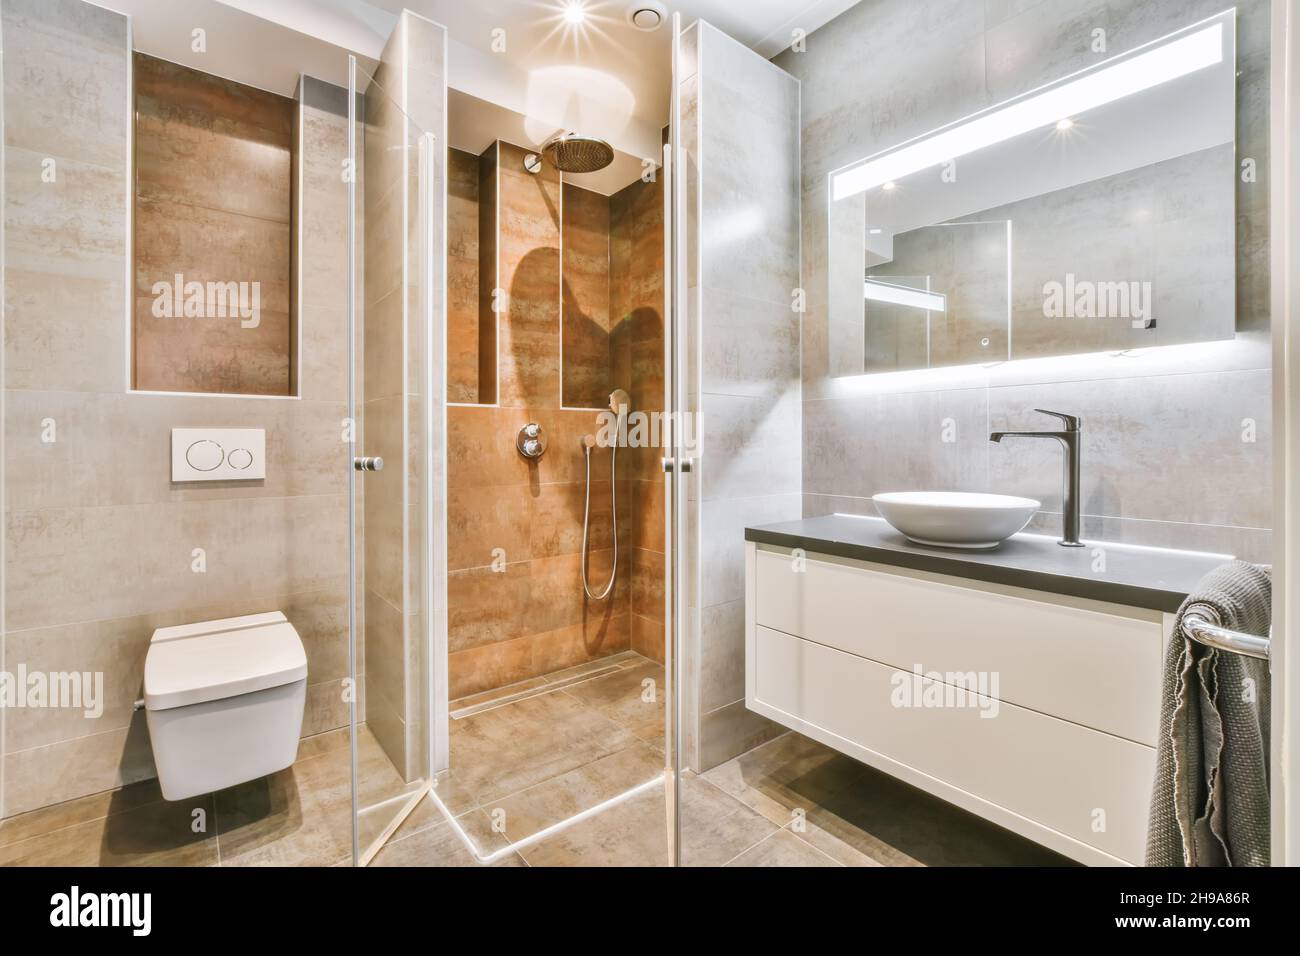 Flush toilet and shower cabin with glass partition in washroom at home Stock Photo